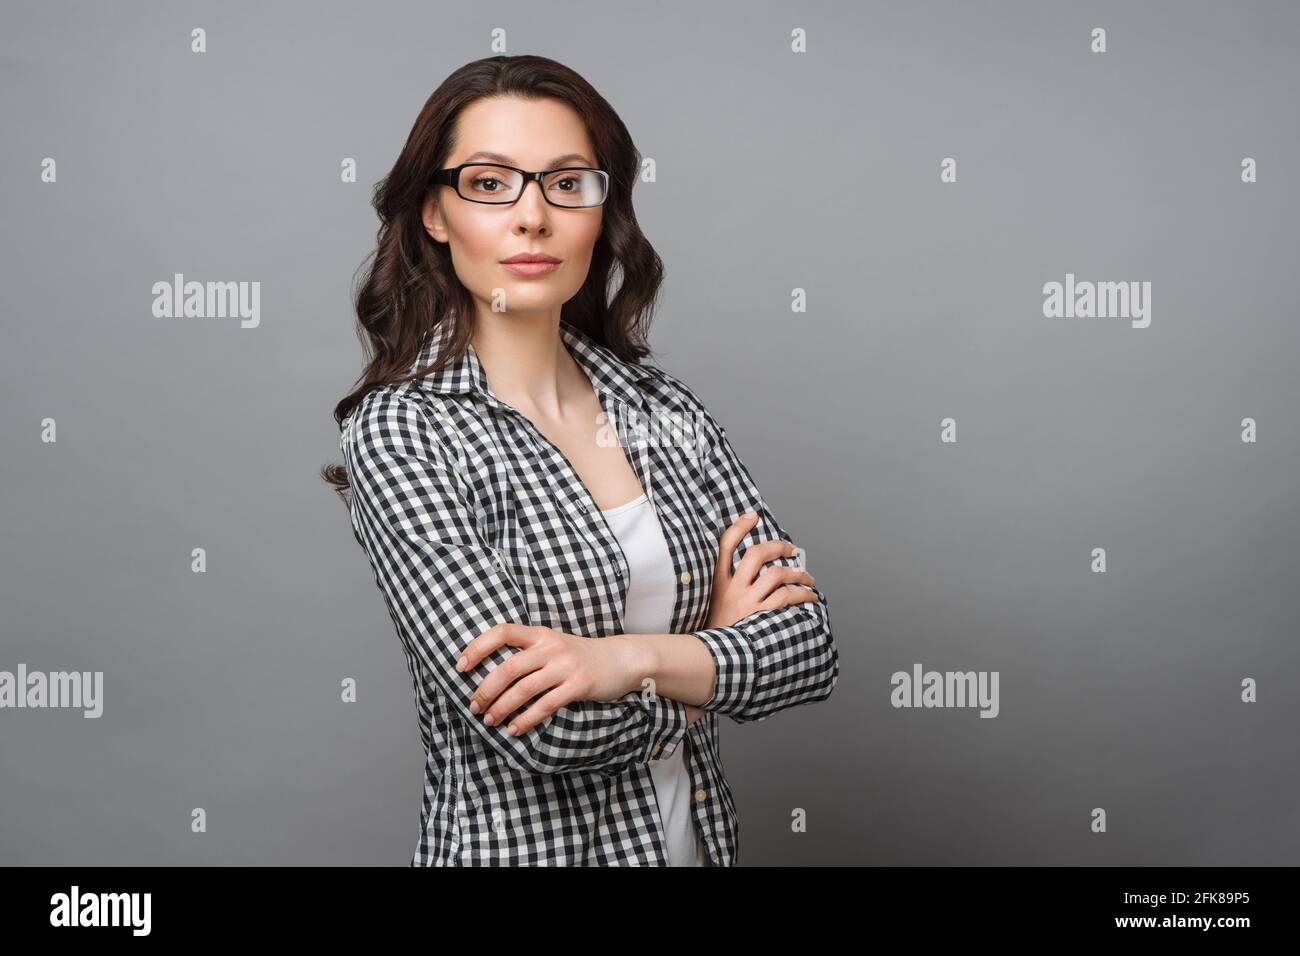 Business portrait of a young woman. A charming brunette with glasses looks at the camera, crossing her arms over her chest. Stock Photo